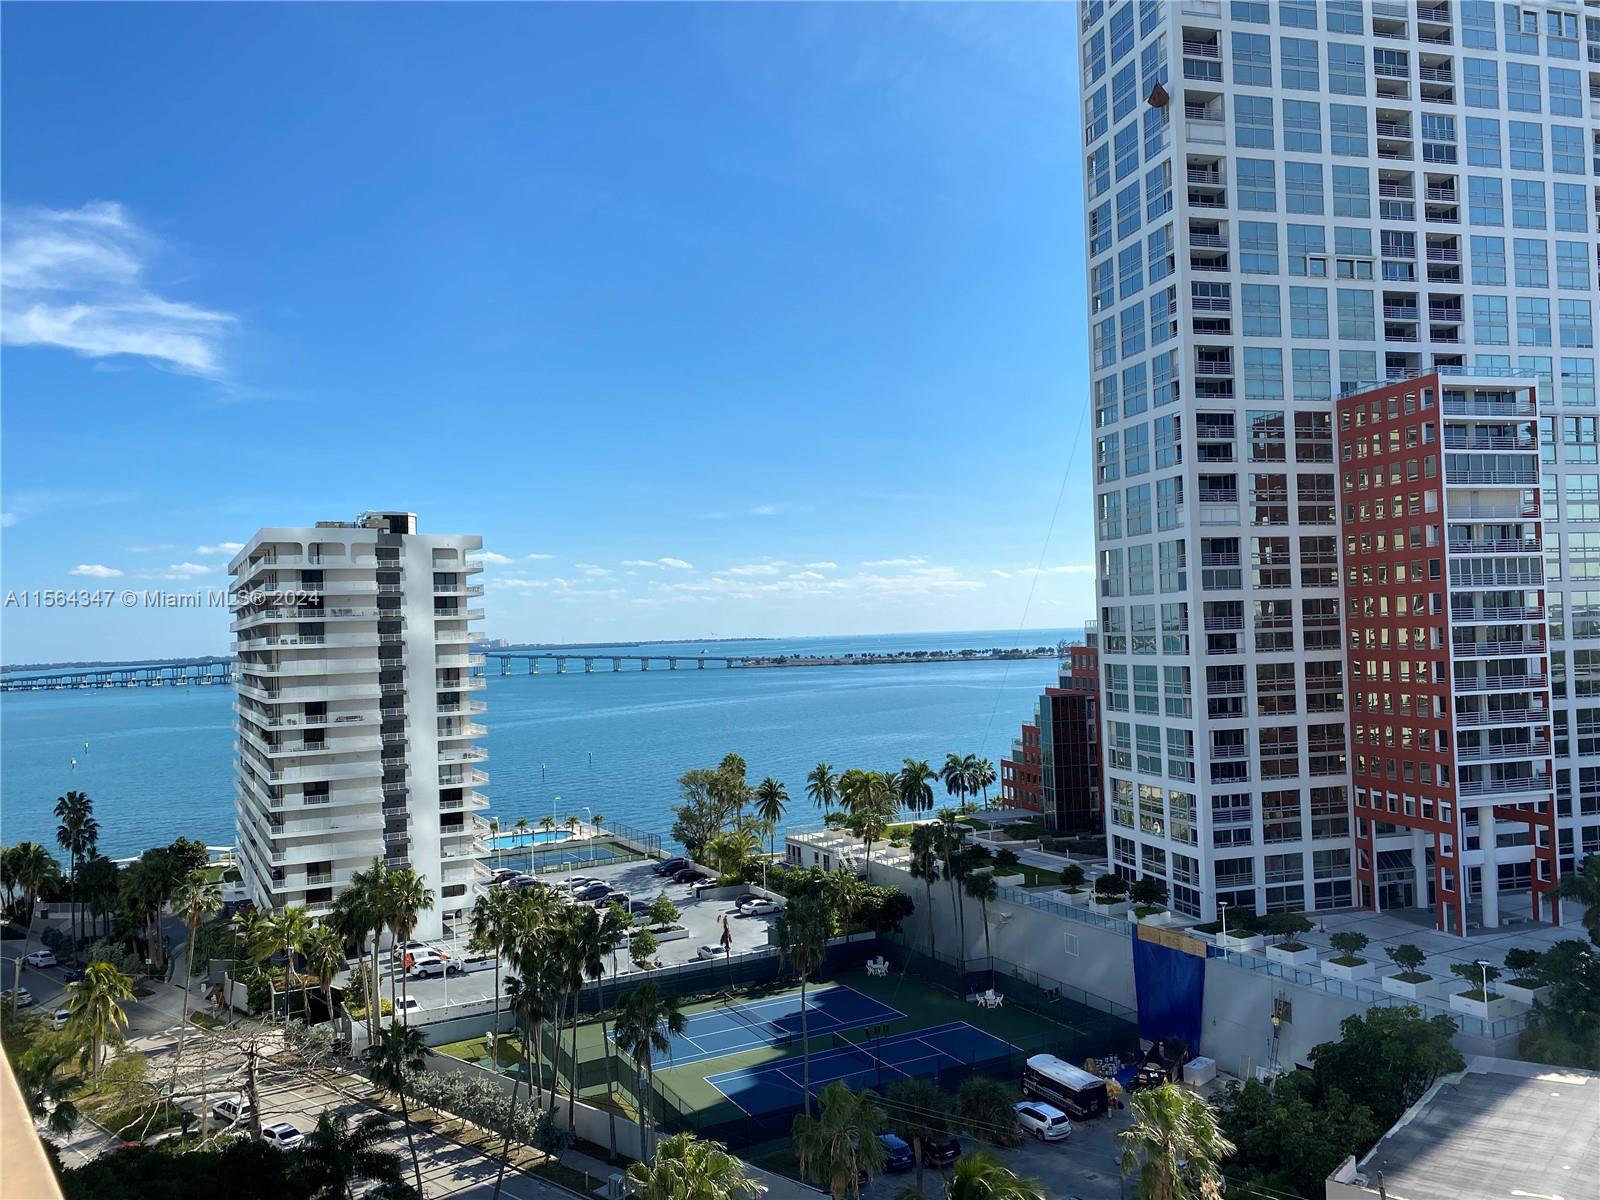 Amazing opportunity to own an exclusive unit in Brickell East Building in the heart of Brickell. 3 units per floor in a boutique building, with 24/7 concierge, beautiful pool/bbq area, and full gym. This unit has 180 degree amazing City and Bay views with 3 bedrooms and 2 full baths. 40-year Recertification pending.
UNIT IS OWNER OCCUPIED AND REQUIRES 24 HOUR NOTICE FOR SHOWING REQUESTS - TEXTS ONLY PLEASE.